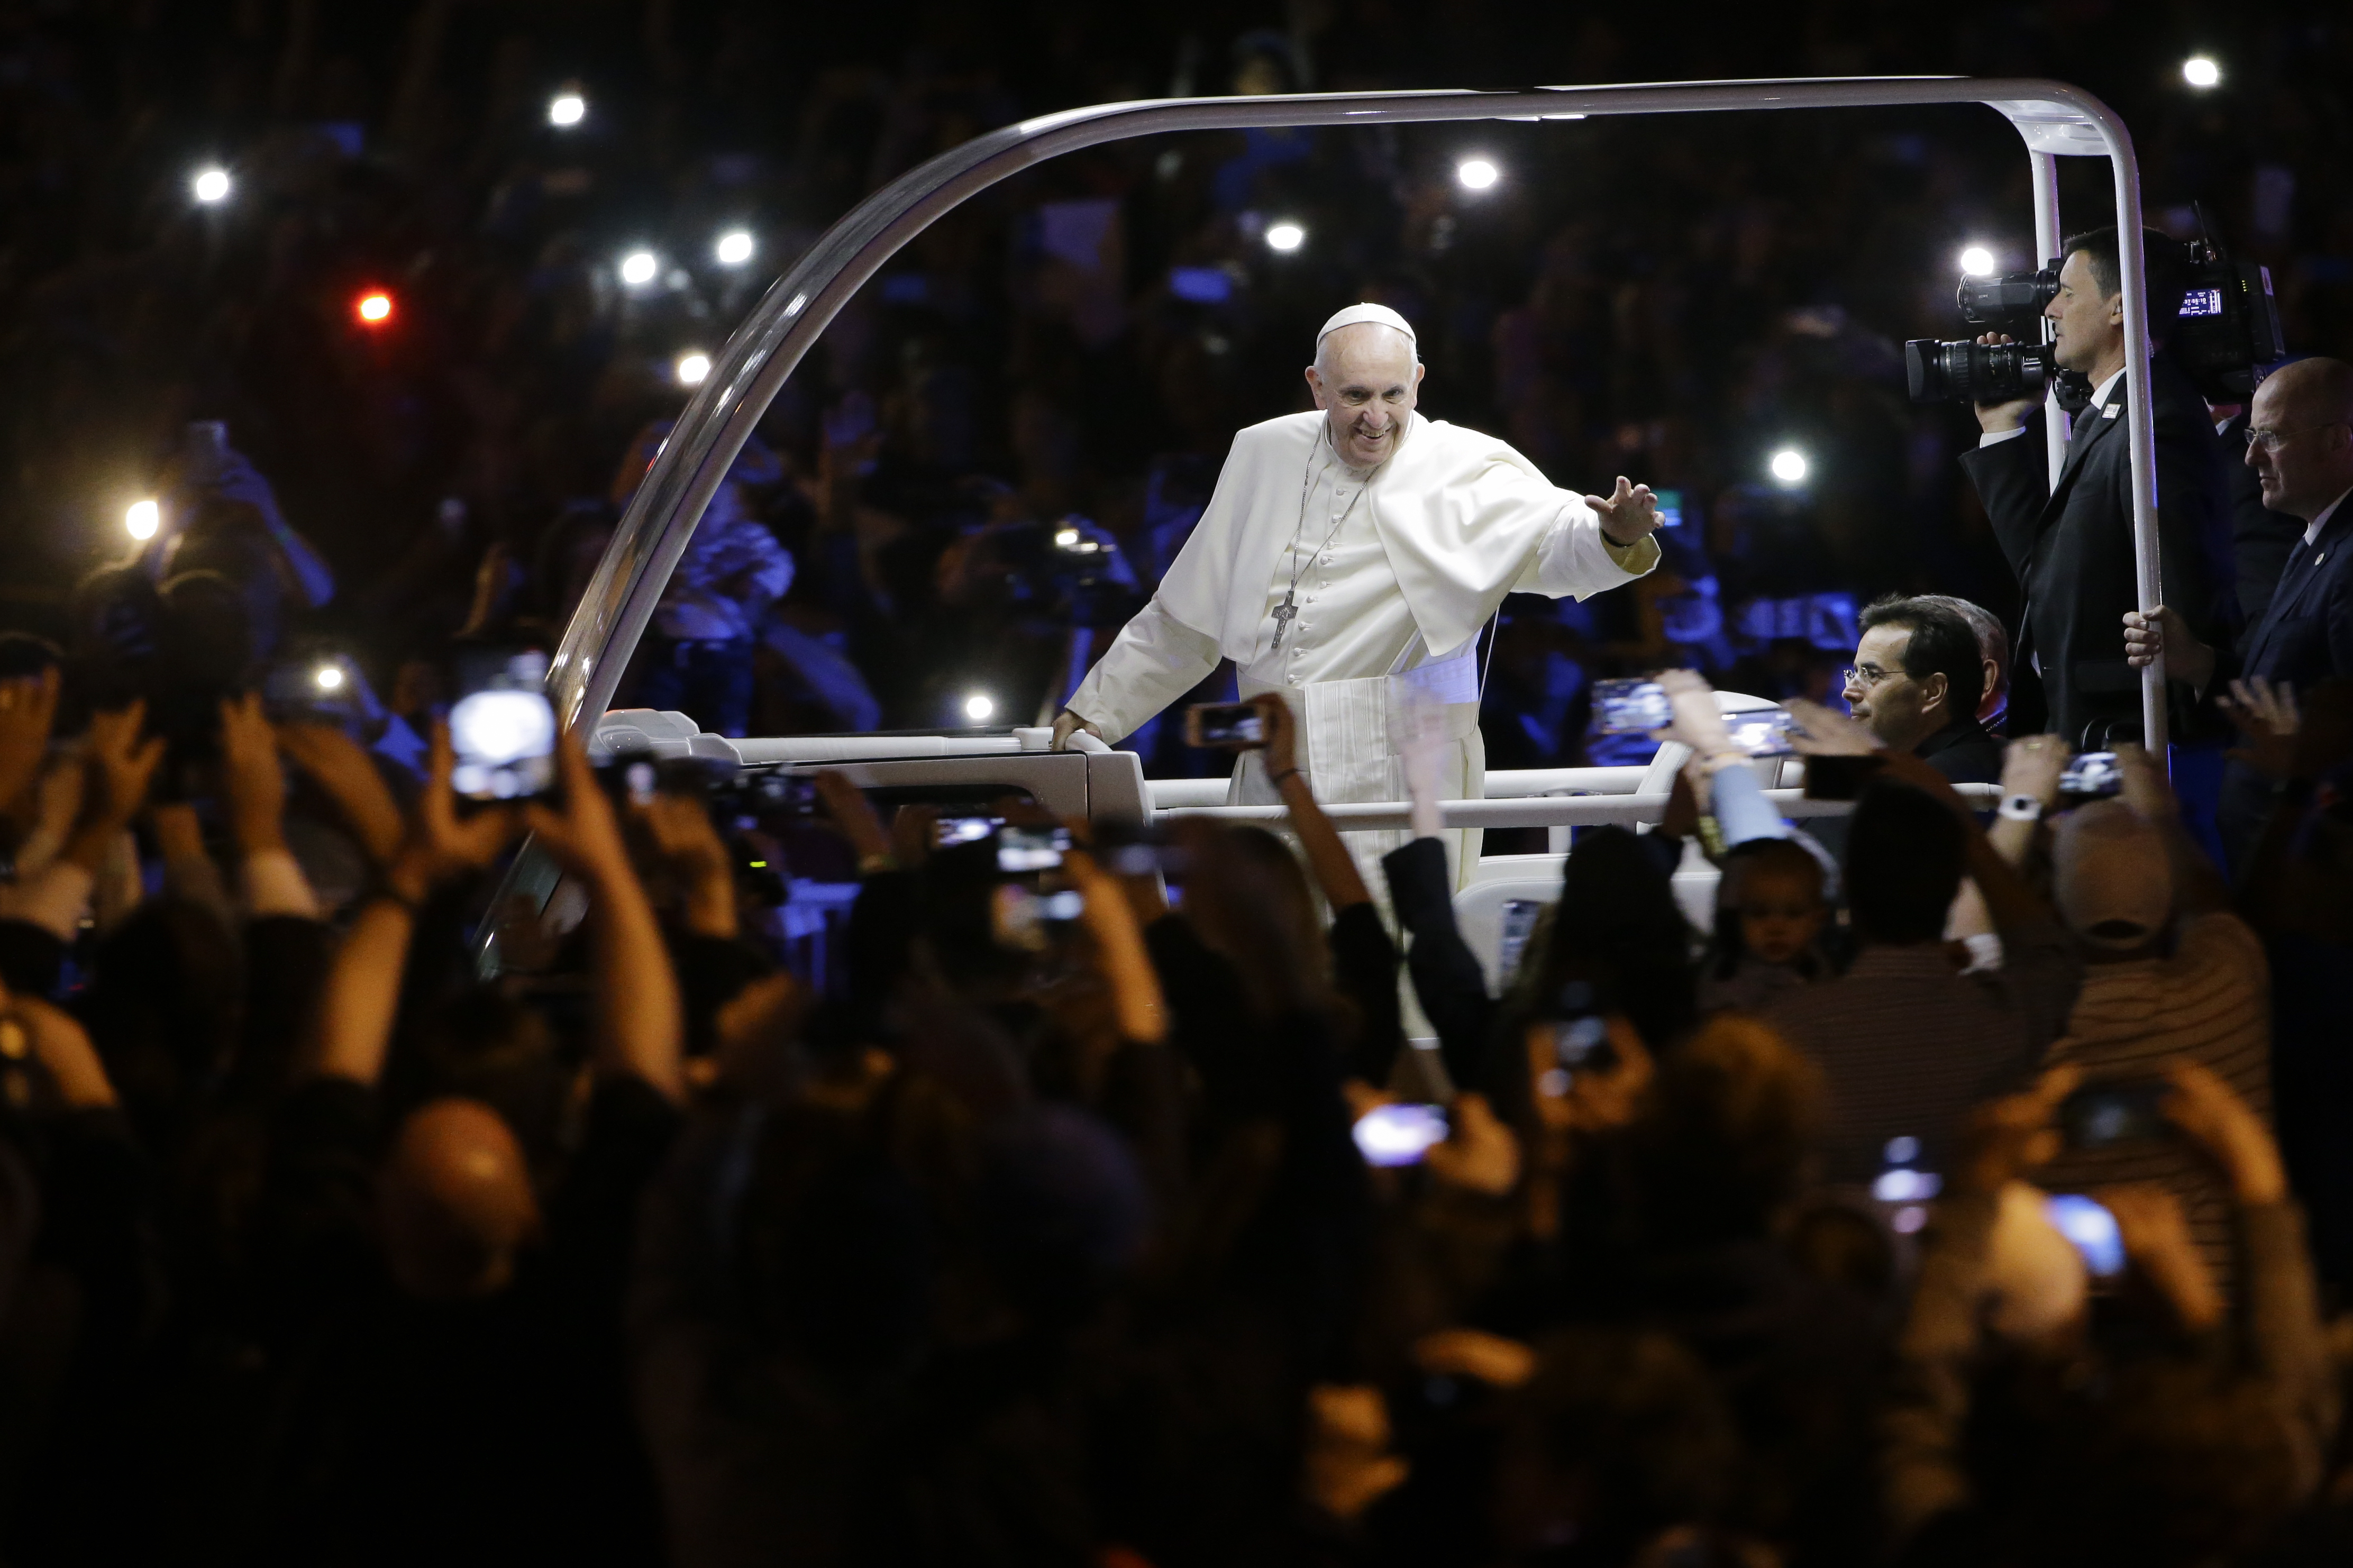 Pope Francis waves to the crowd during a parade in Philadelphia, on Sept. 26, 2015.